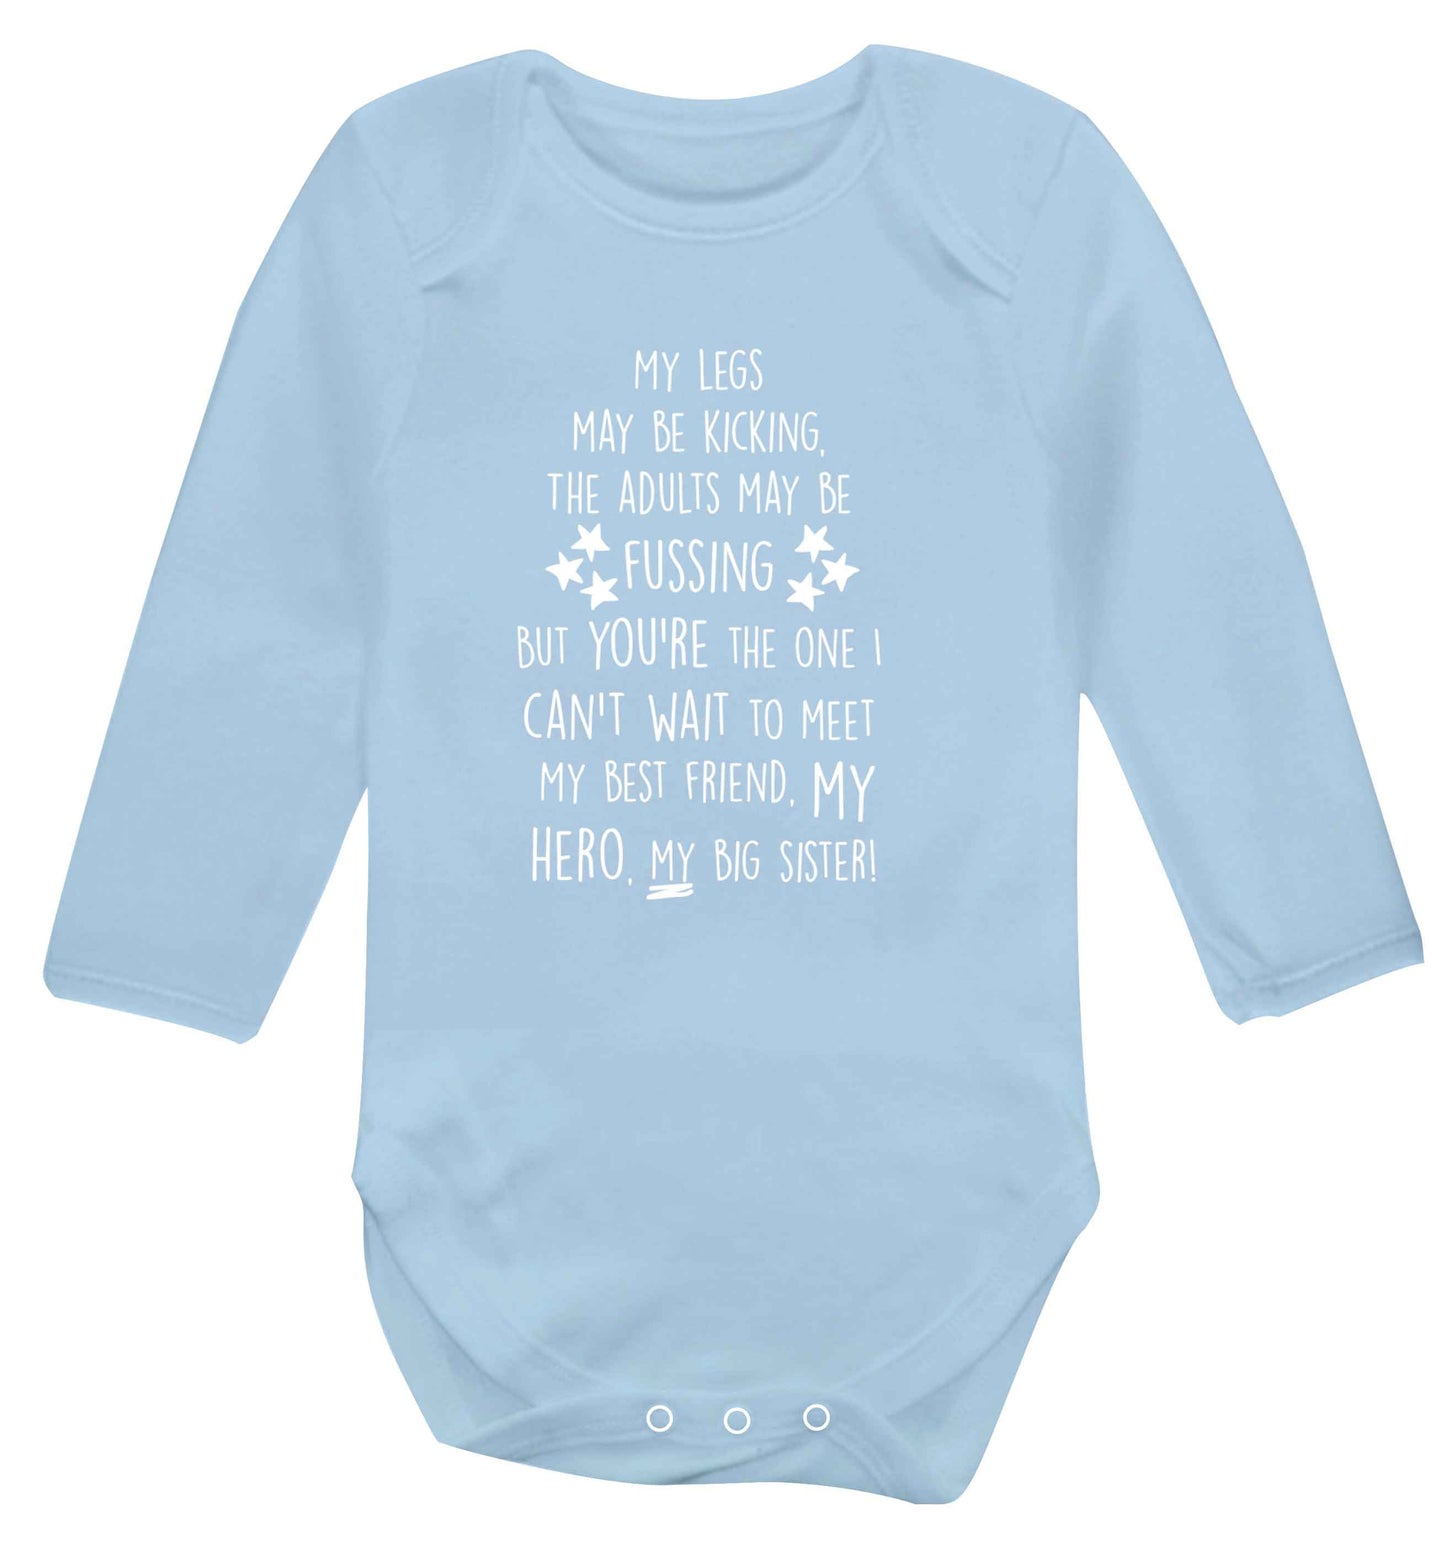 A poem from bump to big sister Baby Vest long sleeved pale blue 6-12 months